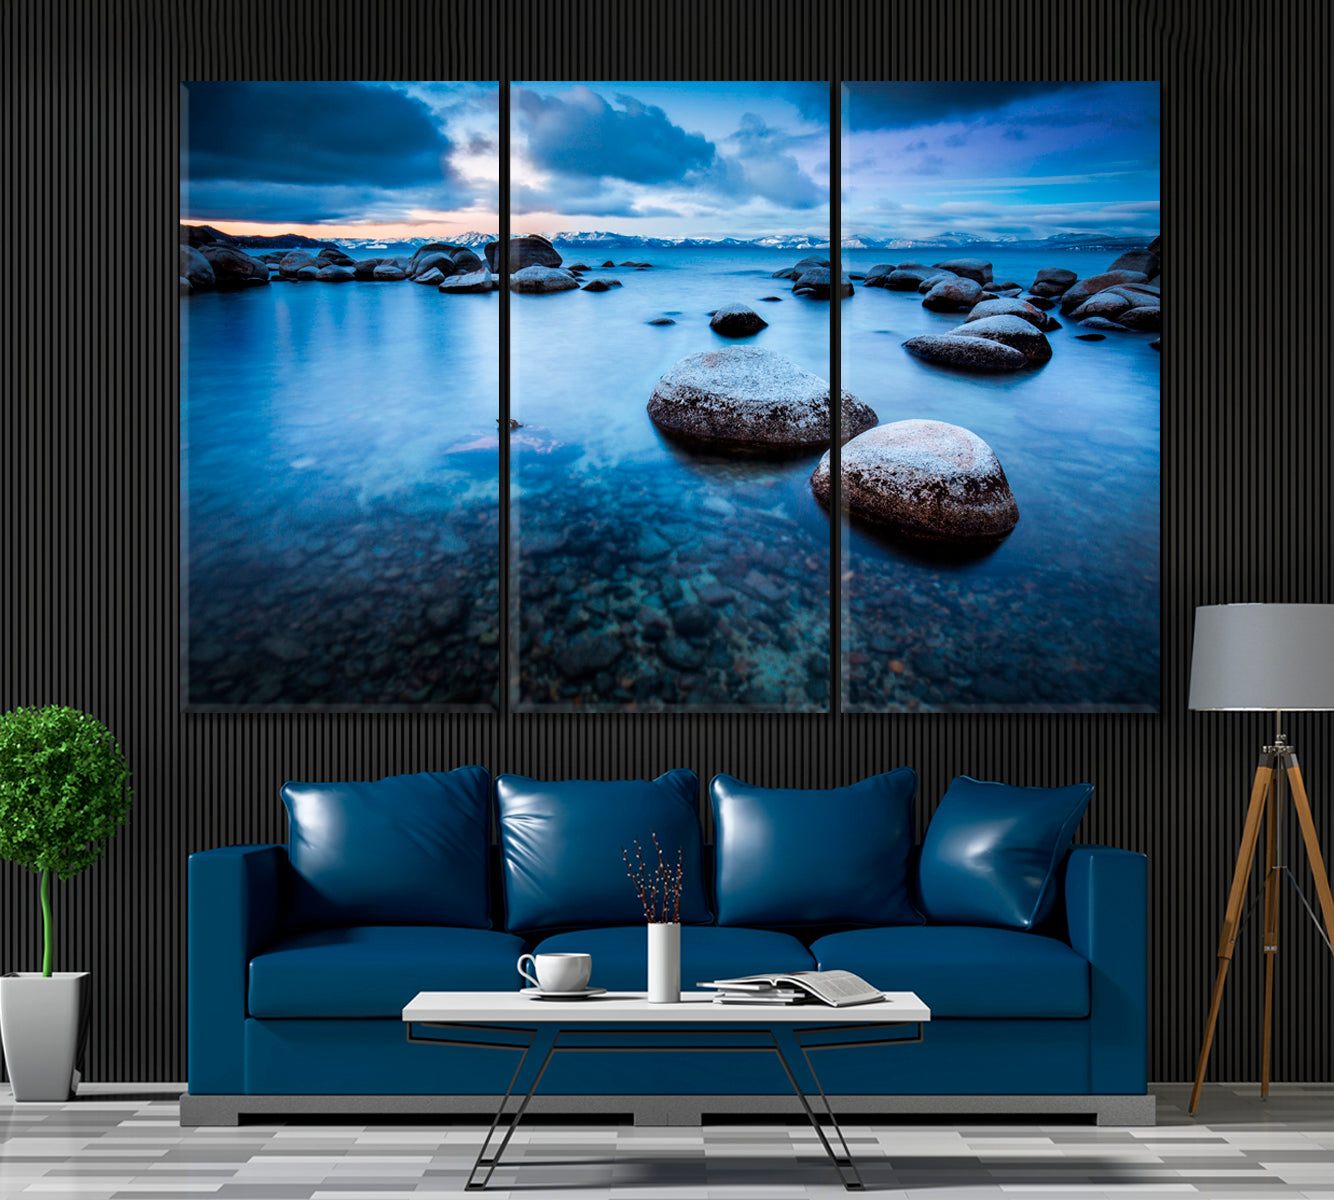 Lake Tahoe Canvas Print ArtLexy 3 Panels 36"x24" inches 